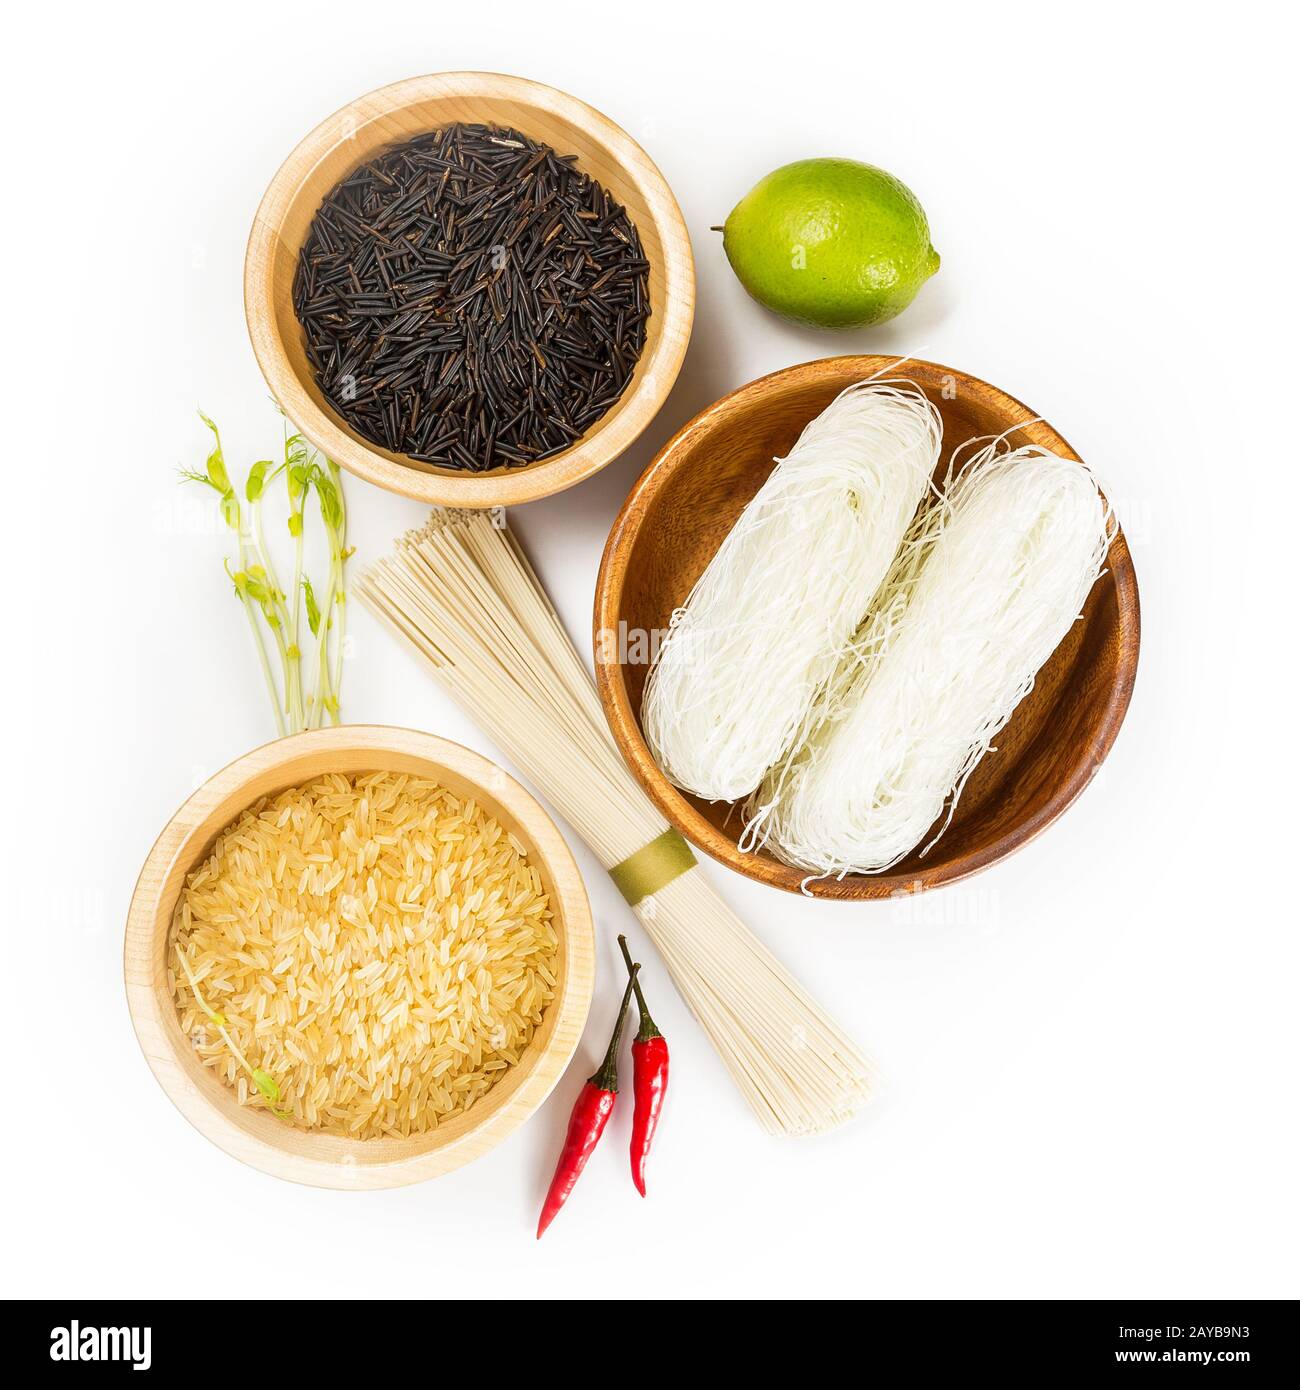 Ingredients for Asian cuisine Stock Photo